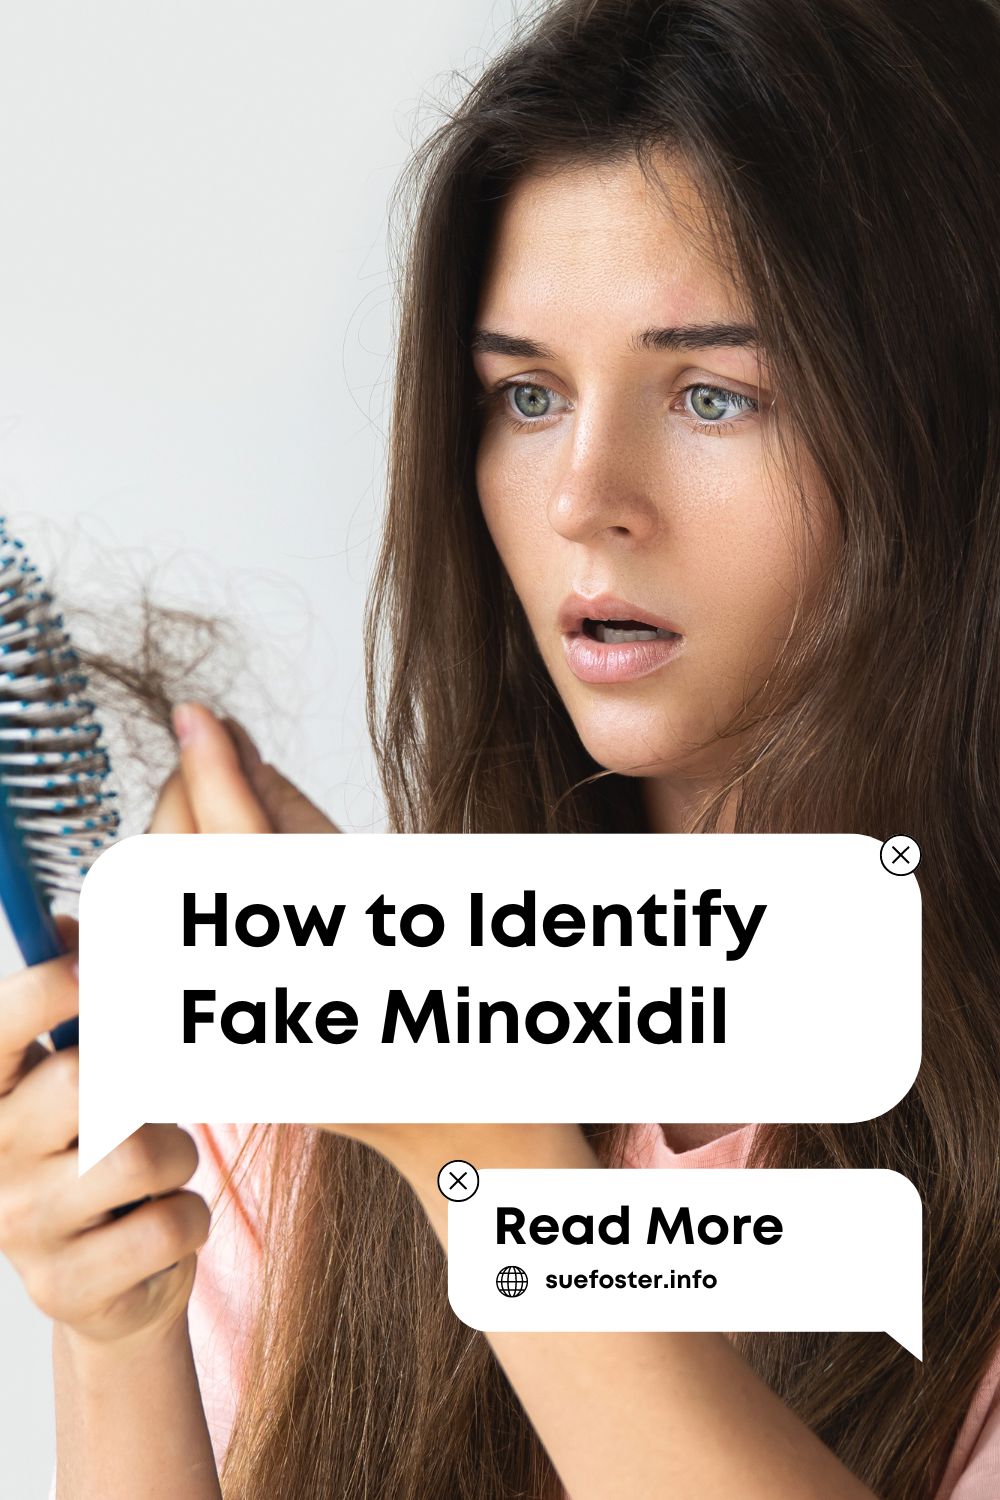 Spotting fake Minoxidil products. Learn to check liquid crystallisation, packaging, expiry, bleach test & fragrance.